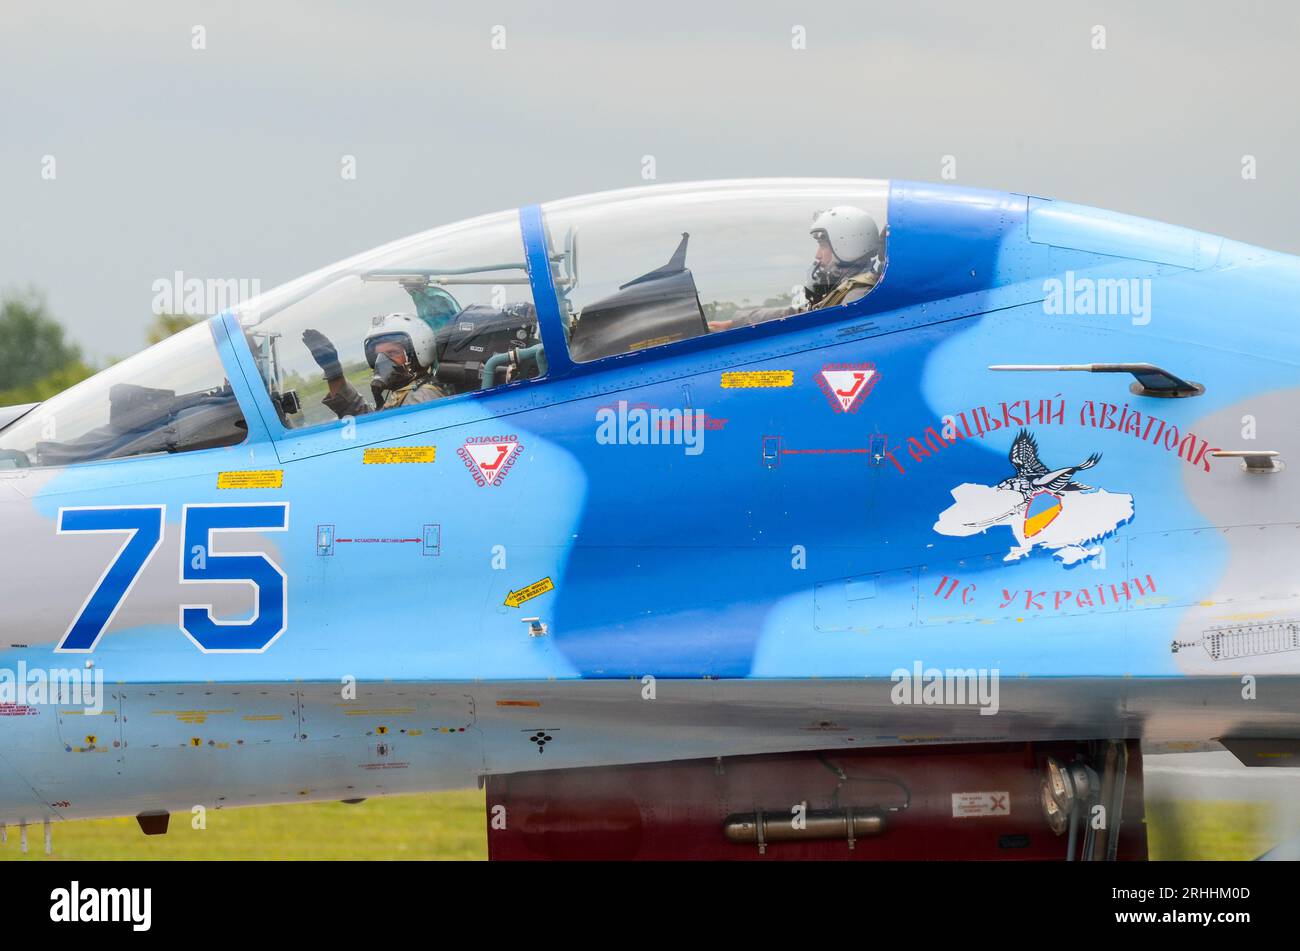 Ukrainian Air Force Sukhoi Su-27 Flanker  blue 75 fighter jet plane taxiing at the Royal International Air Tattoo airshow, UK. Armed Forces of Ukraine Stock Photo